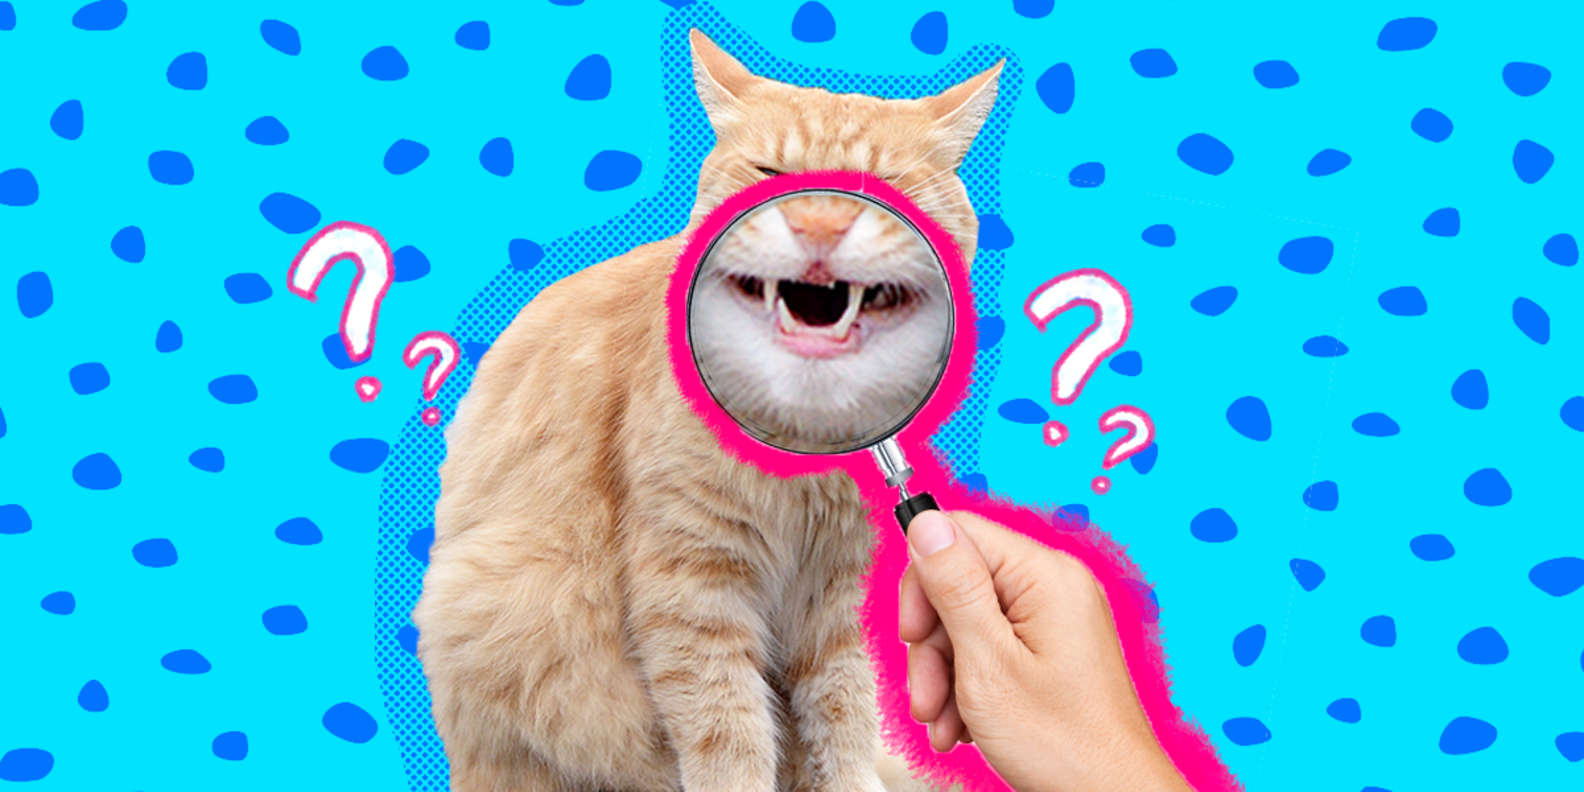 Does Your Cat Need Dental Work?